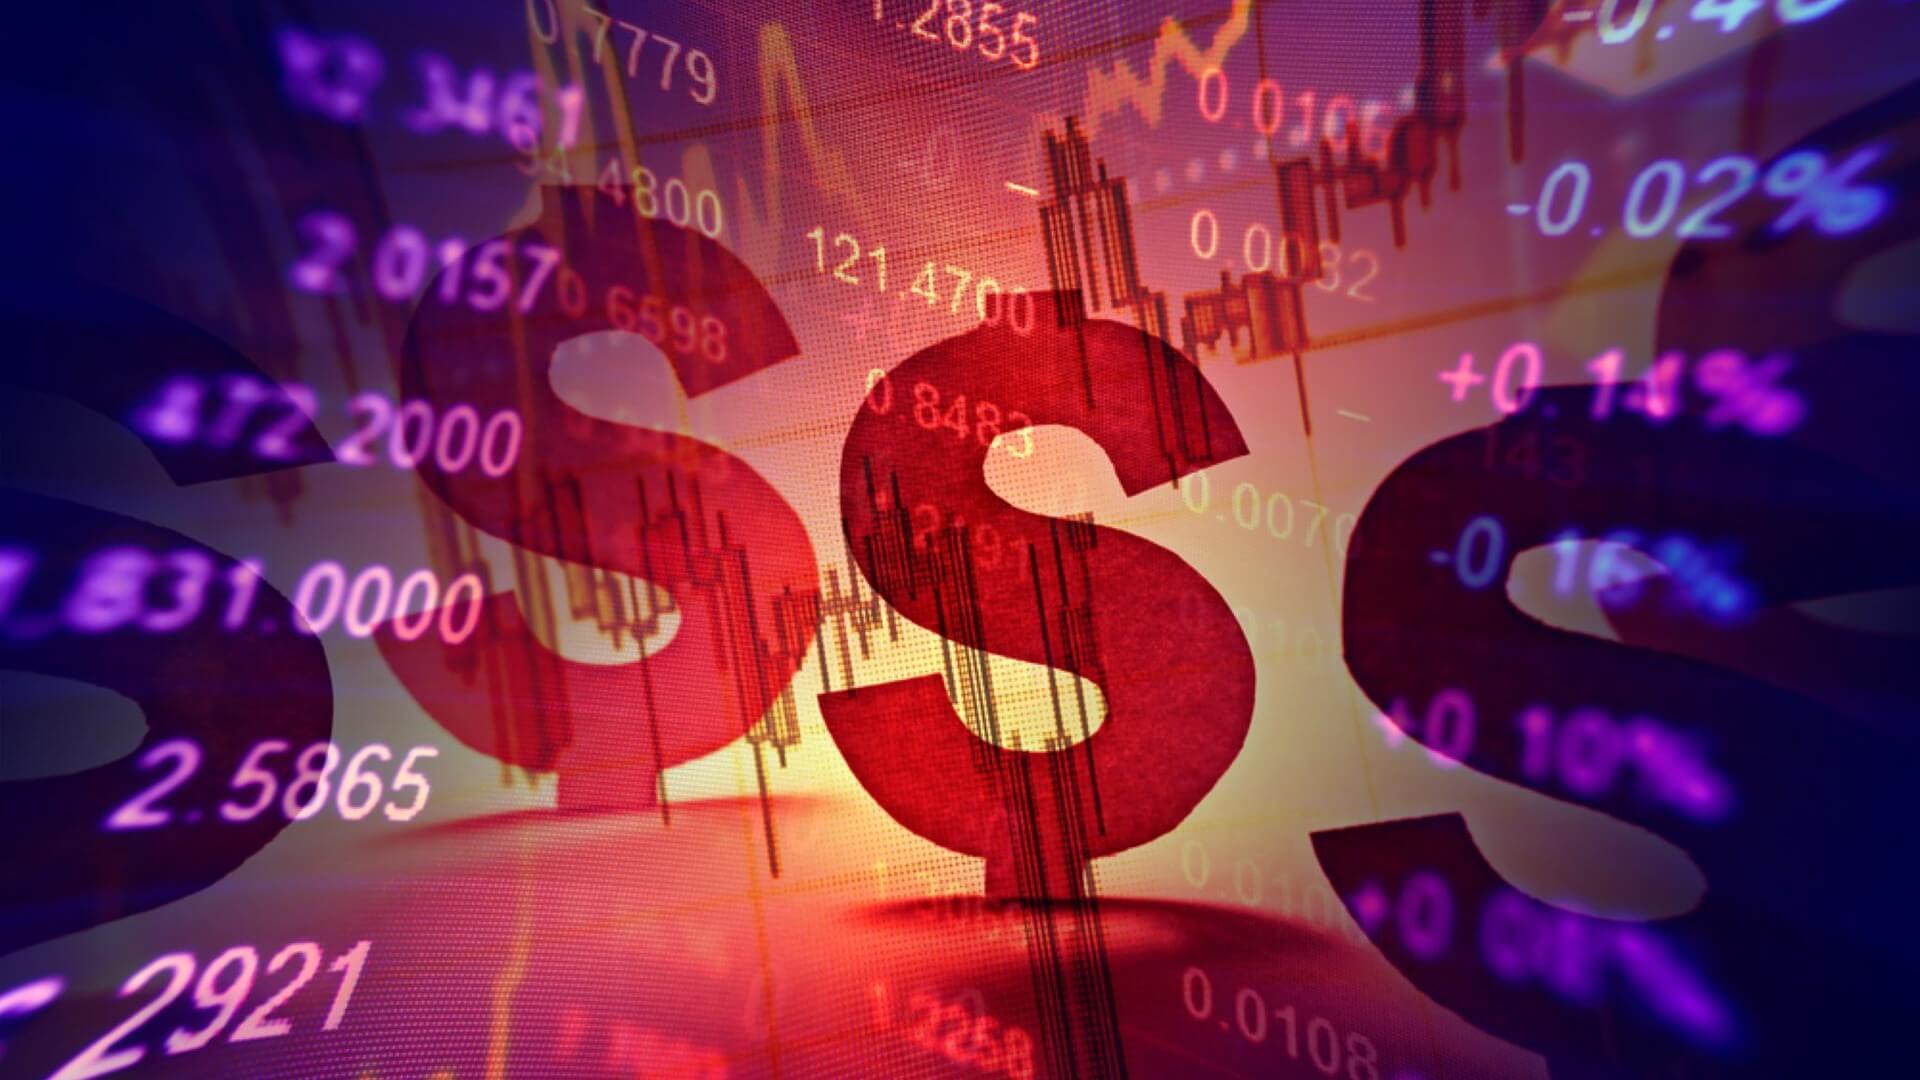 Graphic of red and purple dollar signs with trading figures in the background